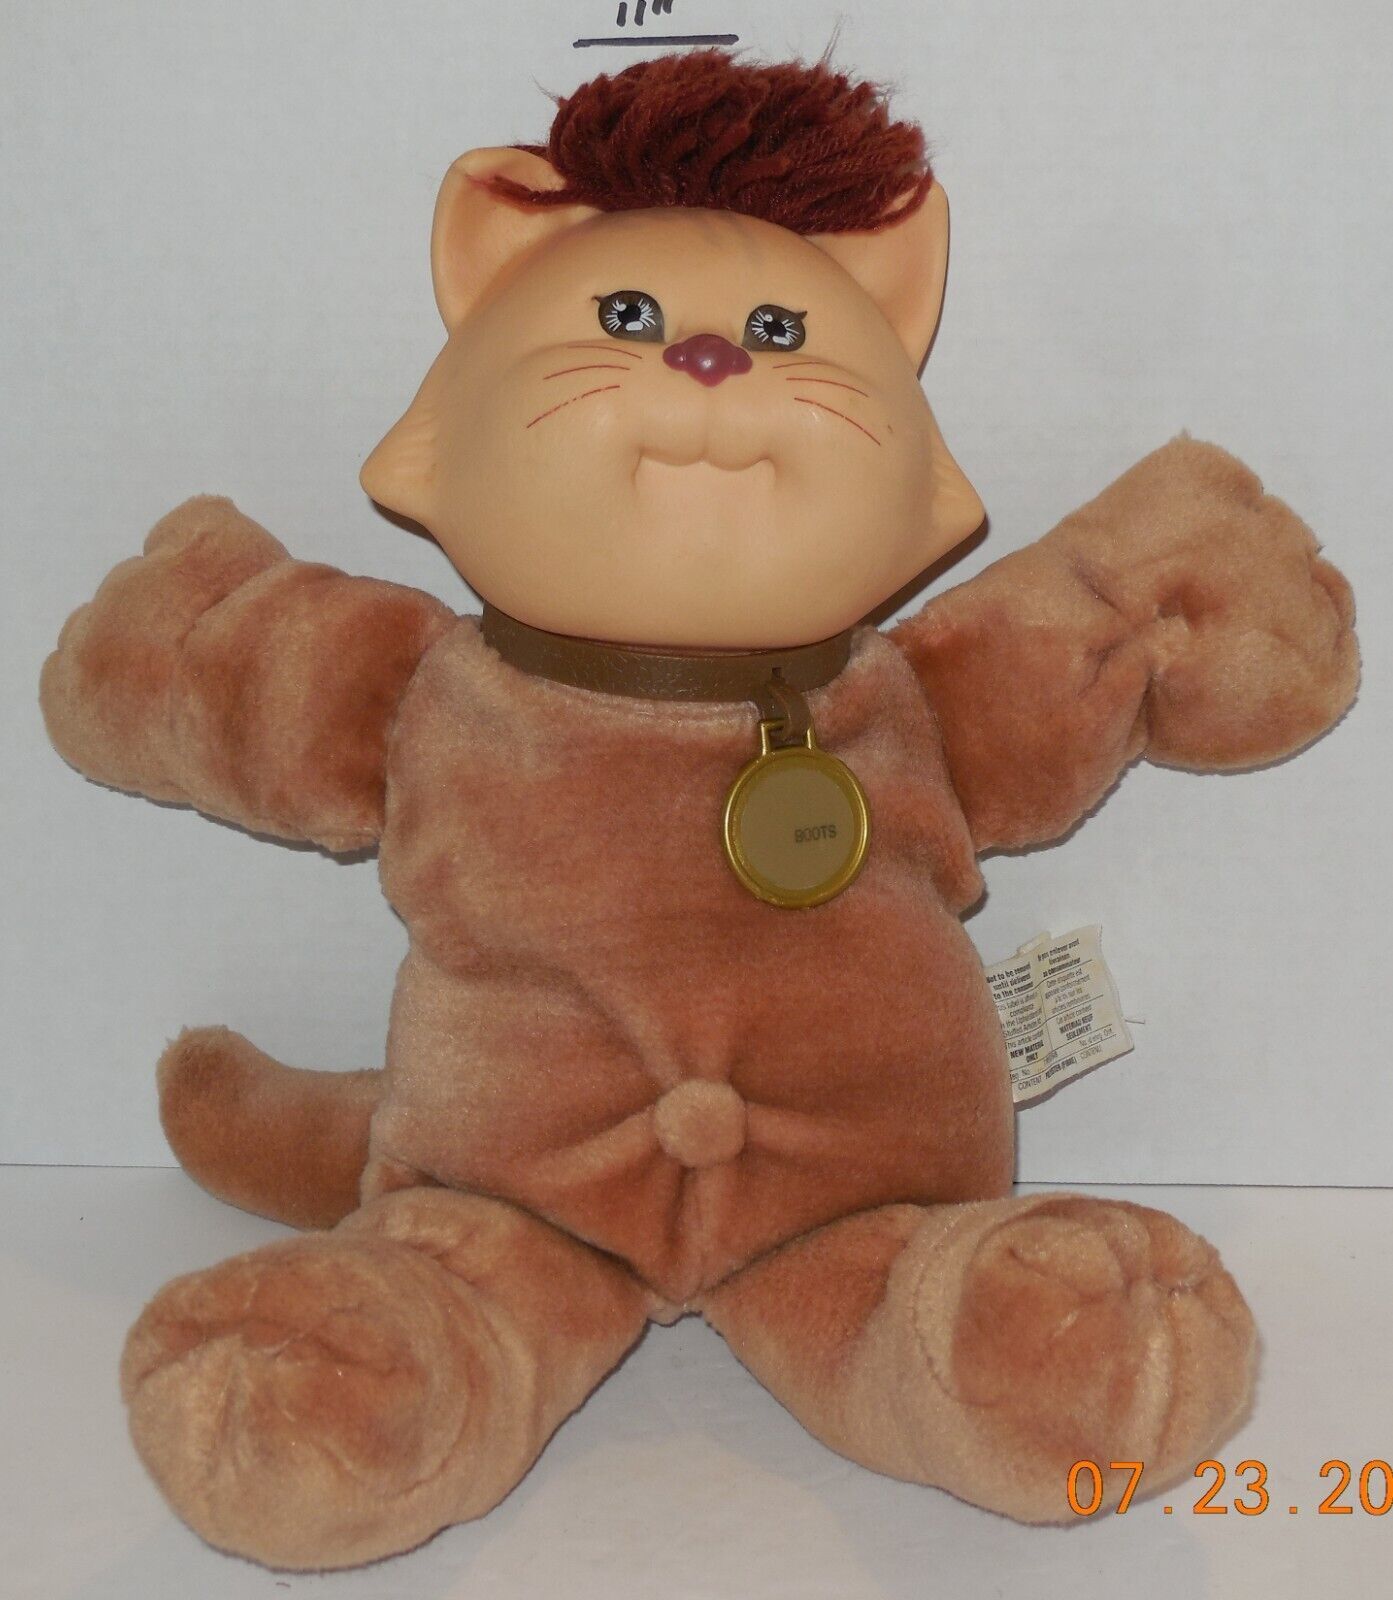 1983 Coleco Cabbage Patch Kids KOOSAS Plush Toy Doll CPK Xavier Roberts OAA #3 - $73.52